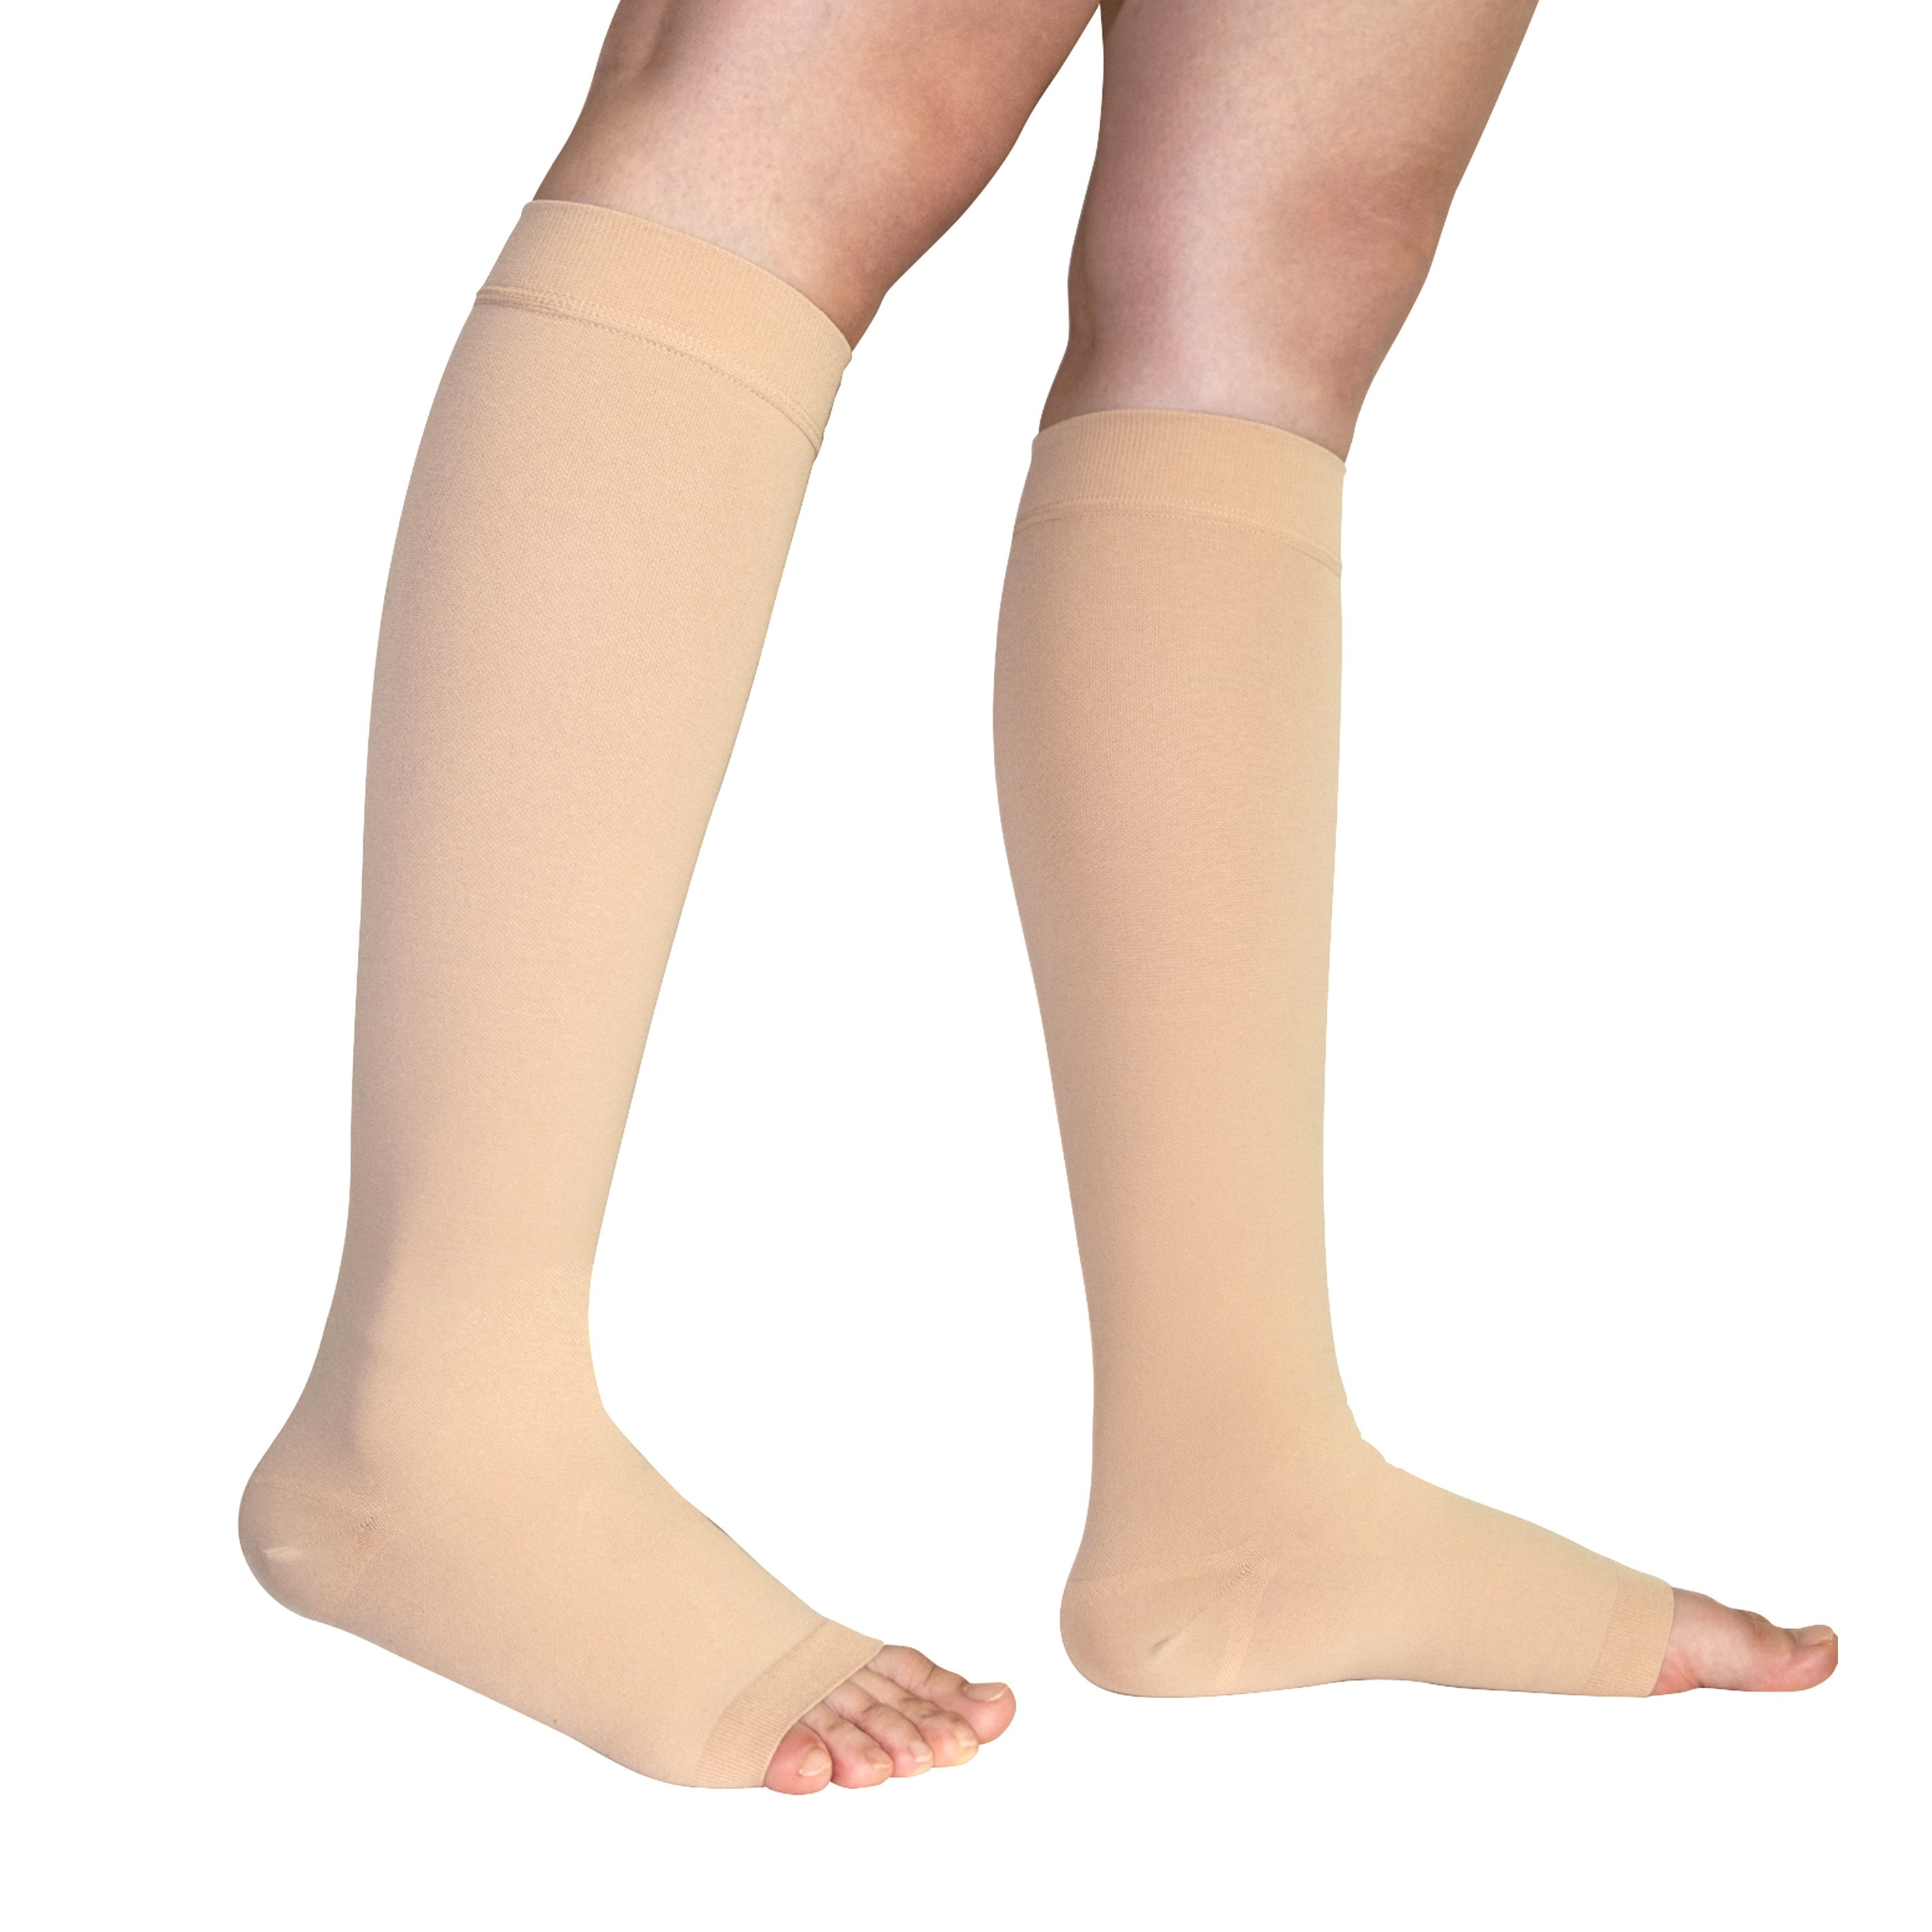 20-30 Compression Medical Grade Stockings for Men and Women, Knee High,  Open Toe